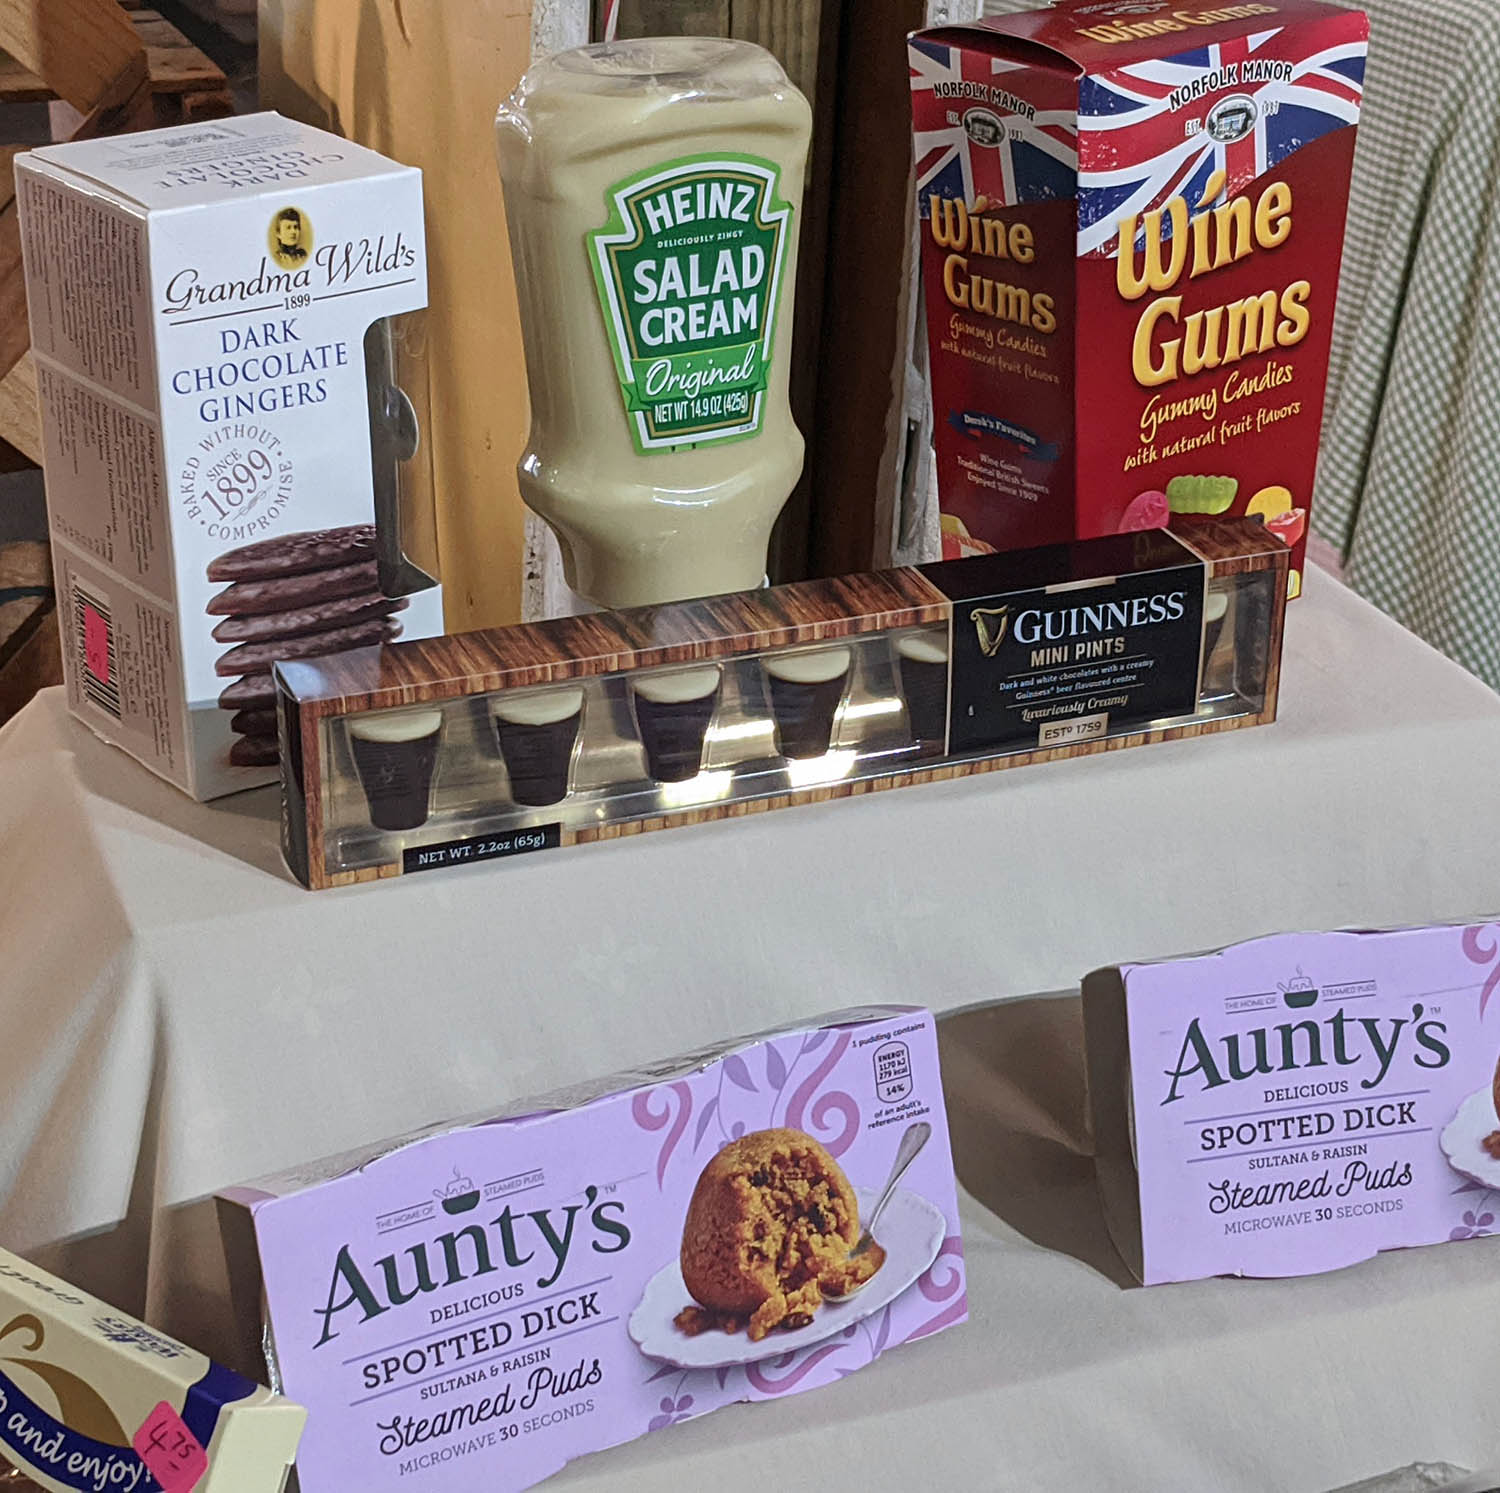 retail display of British biscuits and candy